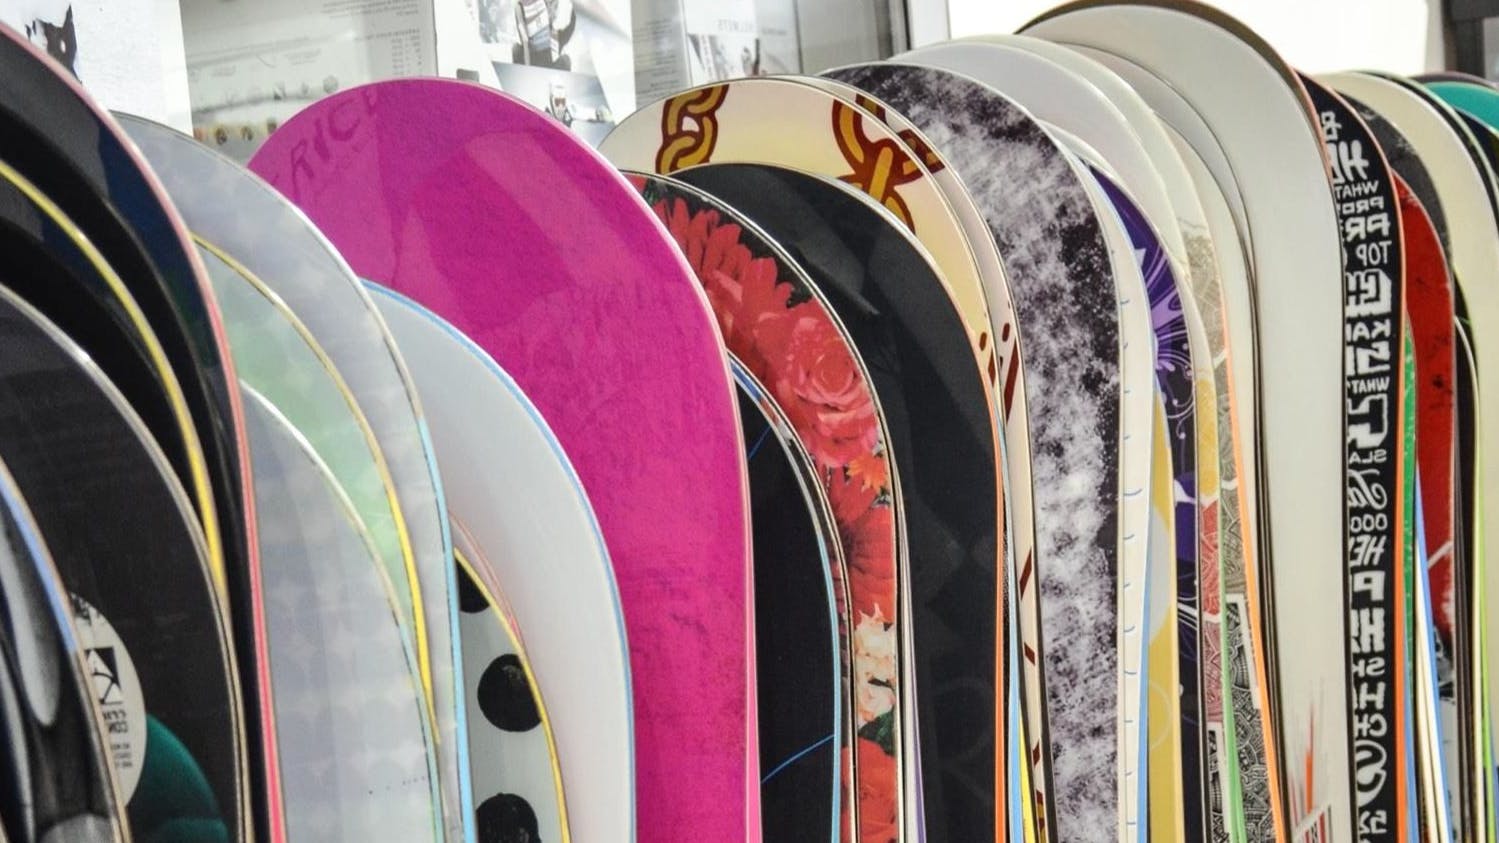 Several snowboards in a line at a store.